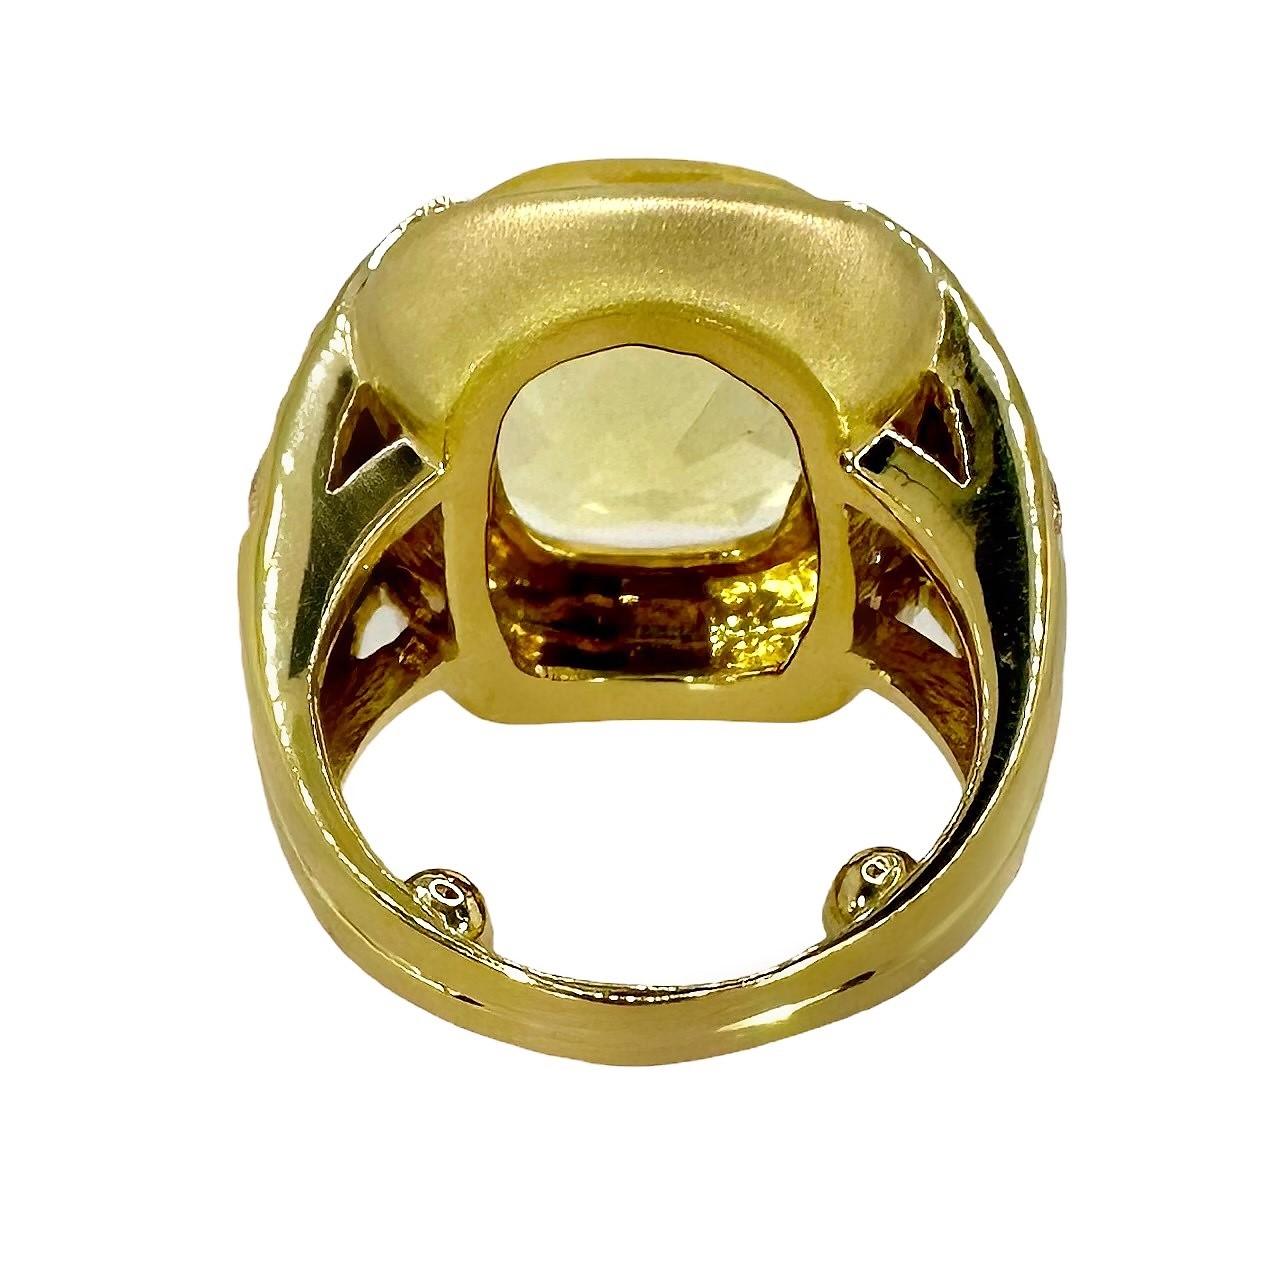 Modern Very Dramatic Late-20th Century 18k Gold, Citrine and Diamond Fashion Ring For Sale